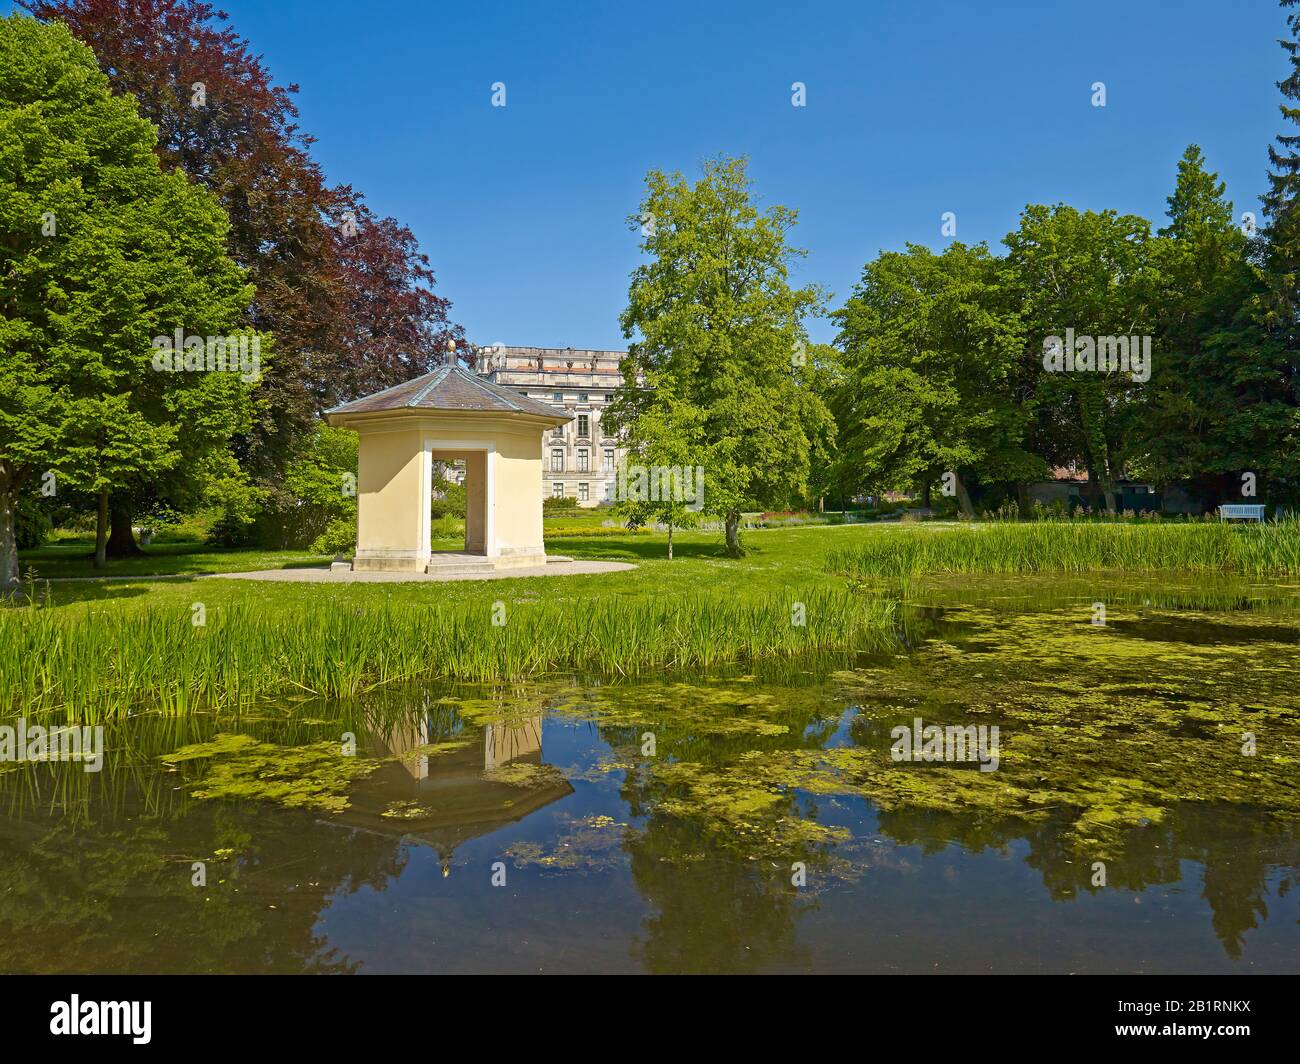 Tea pavilion in the flower garden in the Ludwigslust palace gardens, Ludwigslust-Parchim district, Mecklenburg-West Pomerania, Germany, Stock Photo